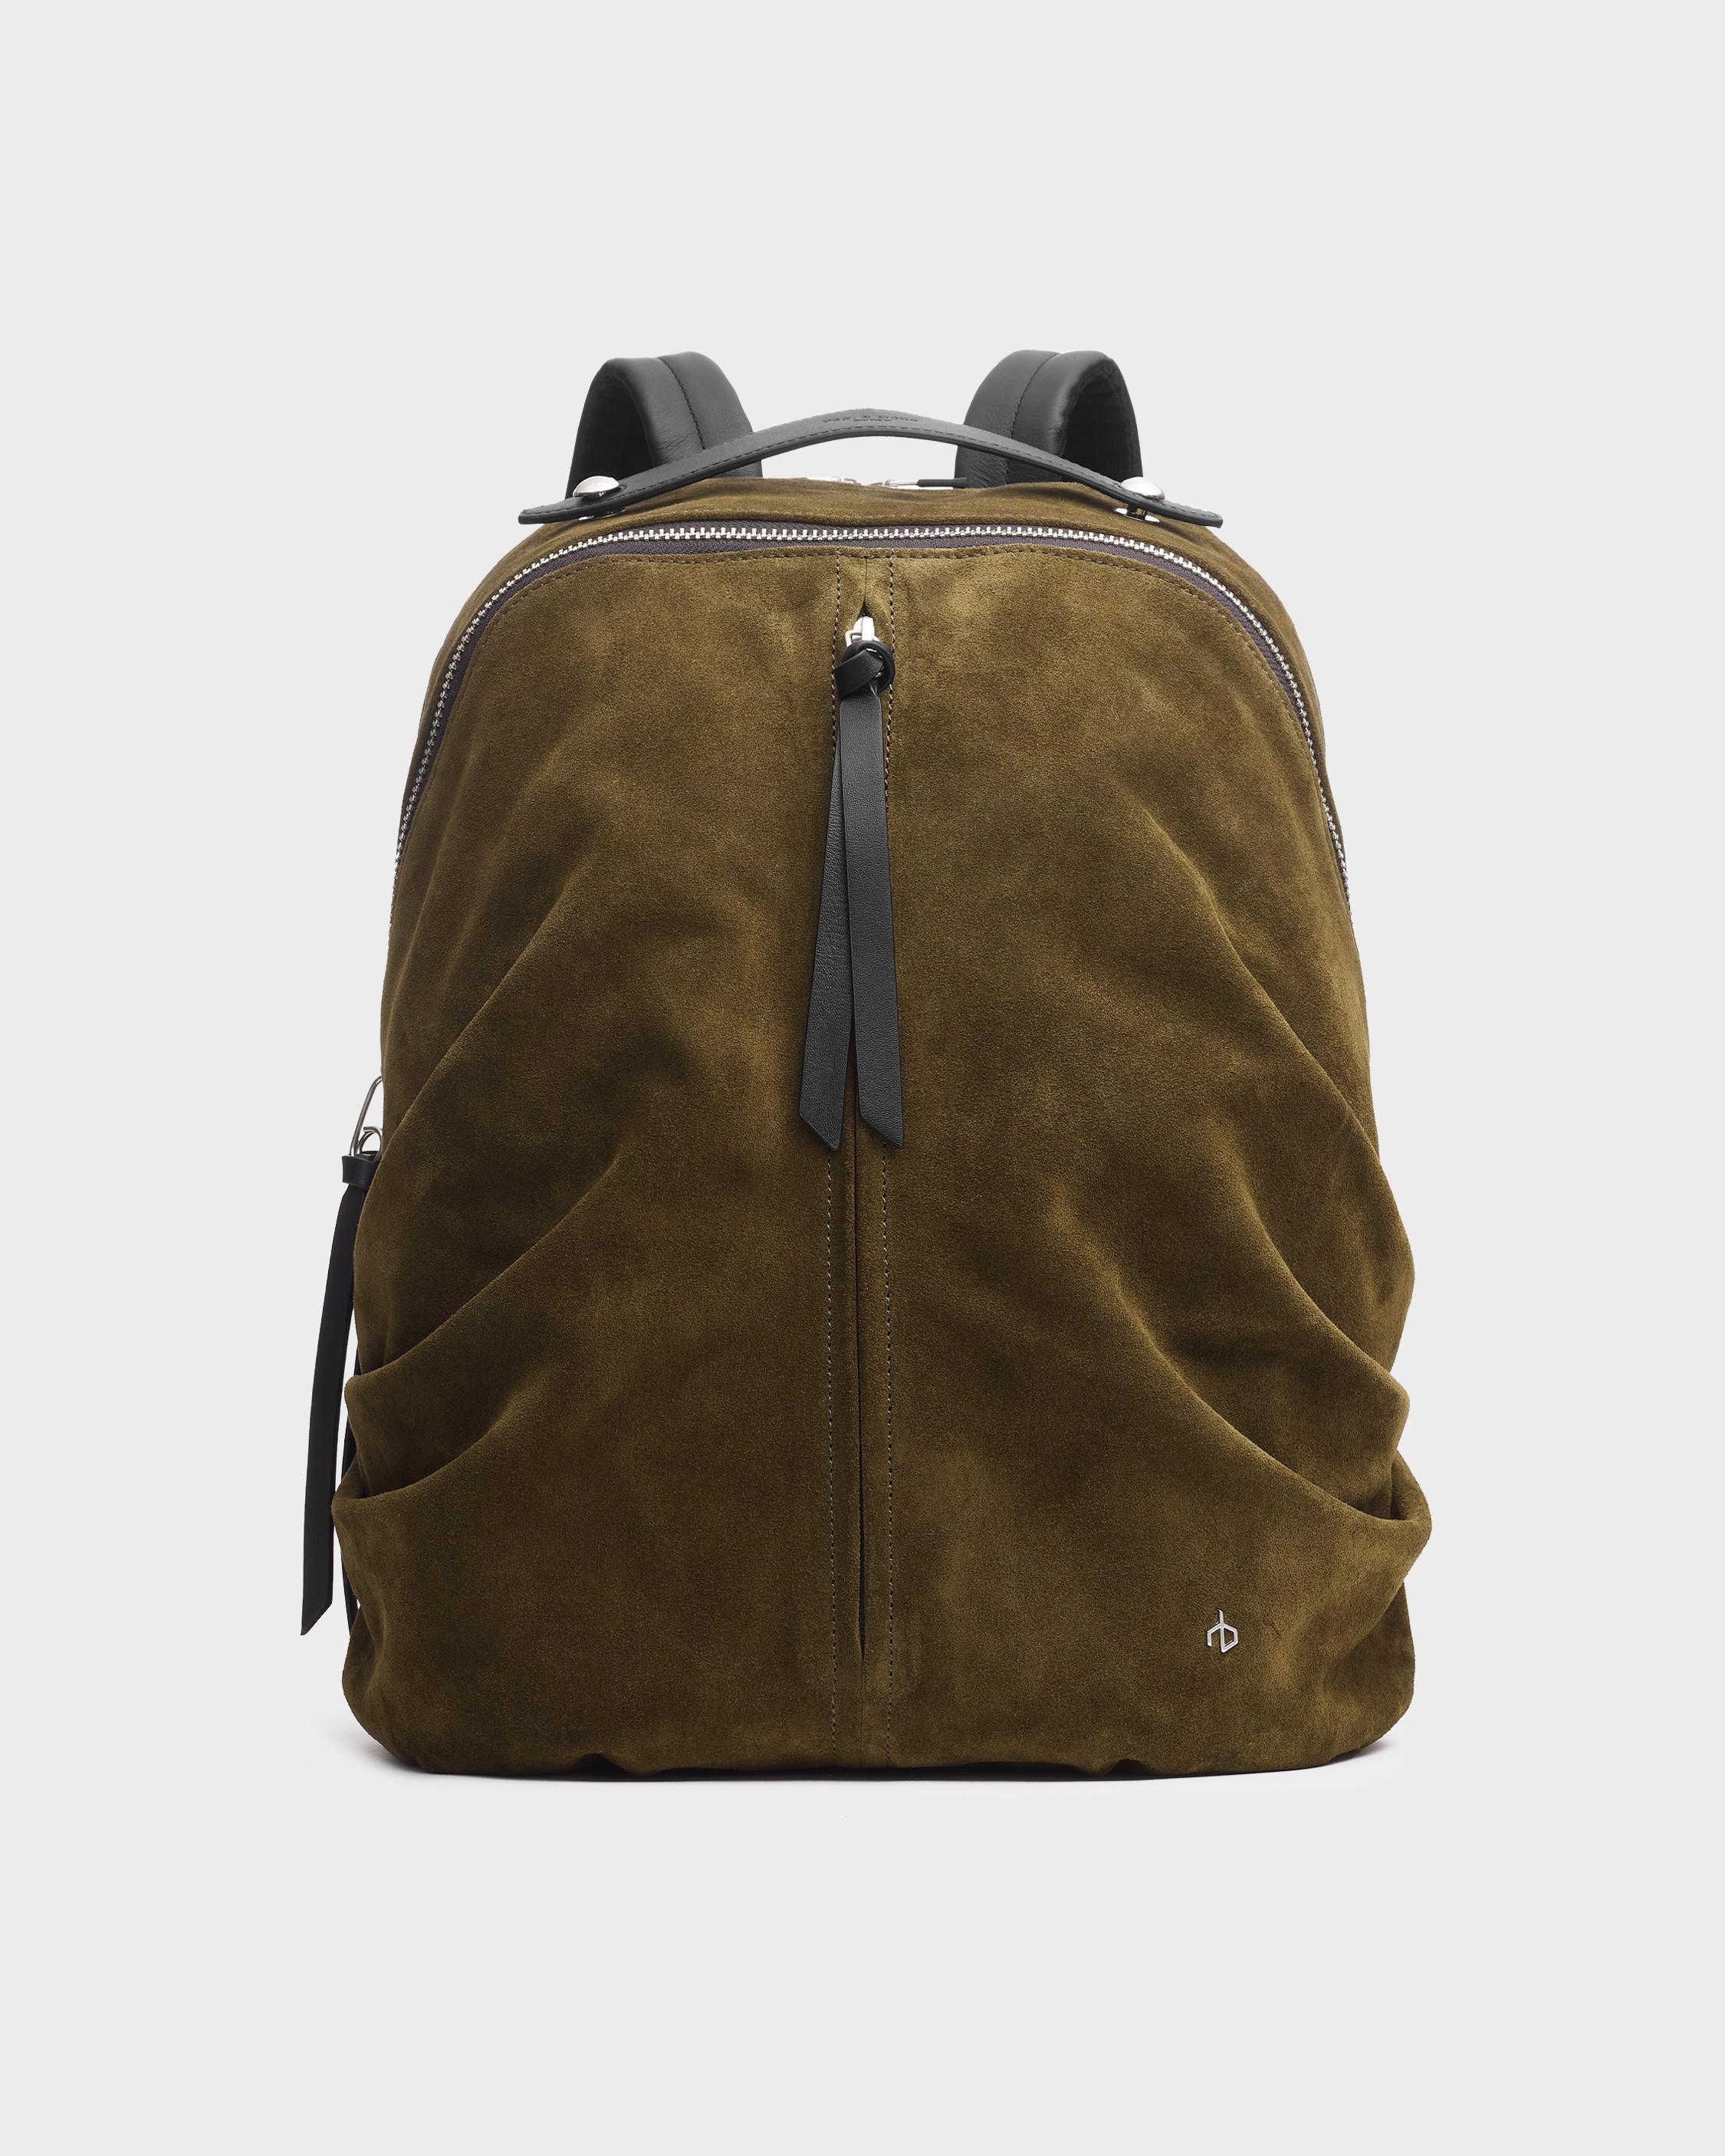 Suede Bags, Suede Backpacks for women